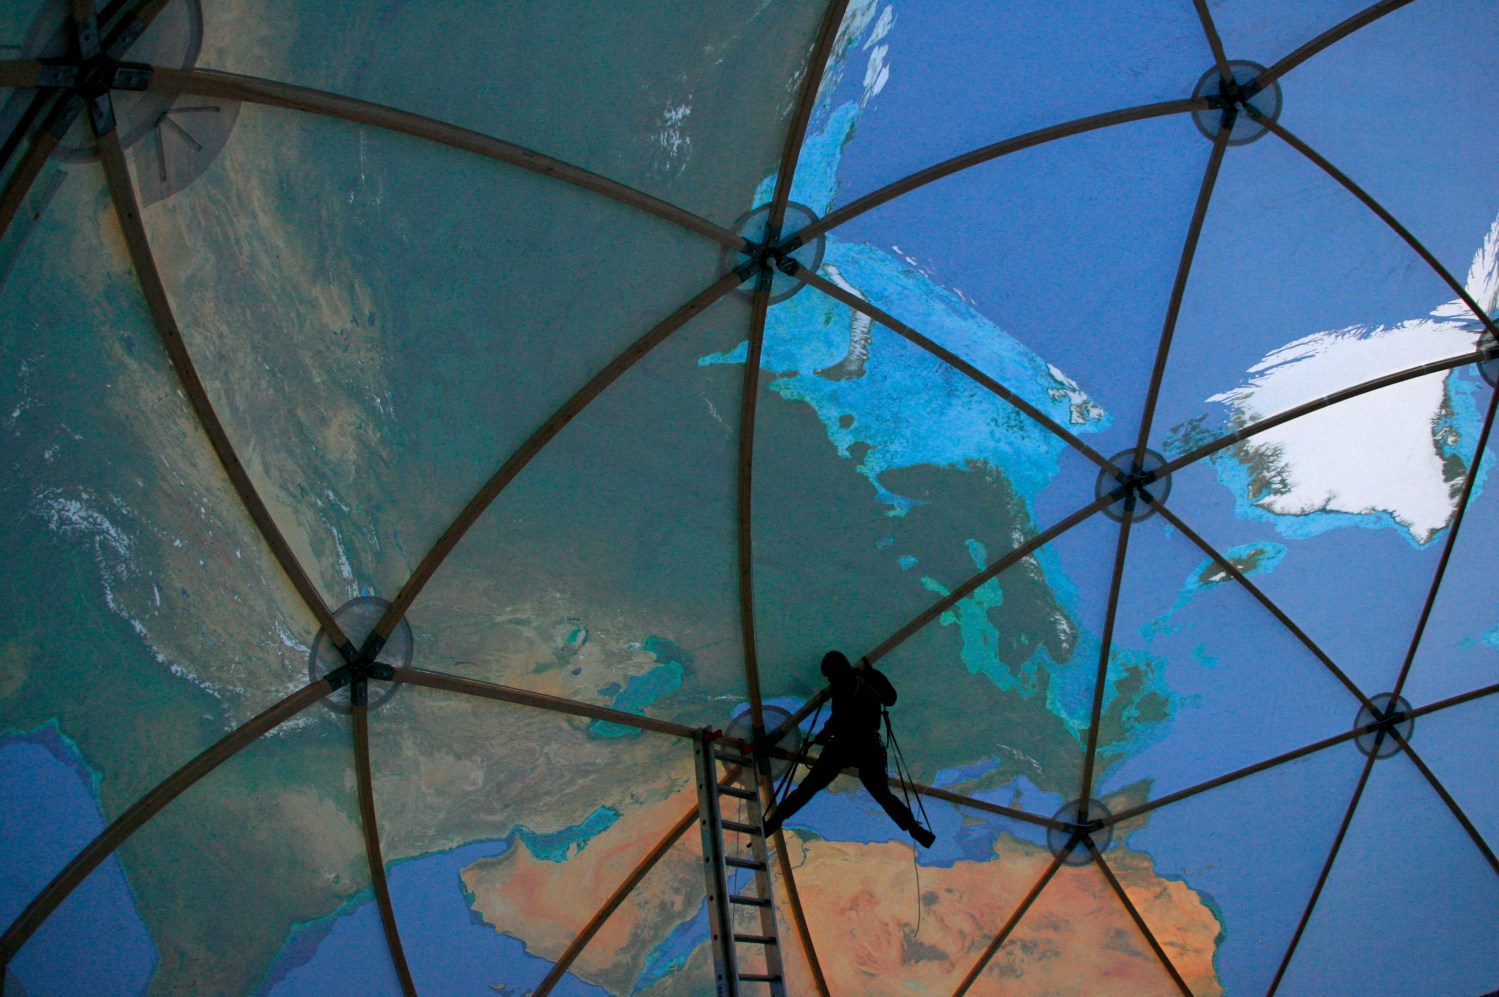 A Greenpeace activist makes adjustments while hanging from the ceiling inside a giant model of the globe near Konin open mine, 70 km from Poznan, western Poland December 3, 2008. Greenpeace established a camp to protest against the damage it says the Konin mine is doing to the climate, regional tourism and farming, and against the planned opening of new sites. REUTERS/Kacper Pempel    (POLAND) - GM1E4C406SK01